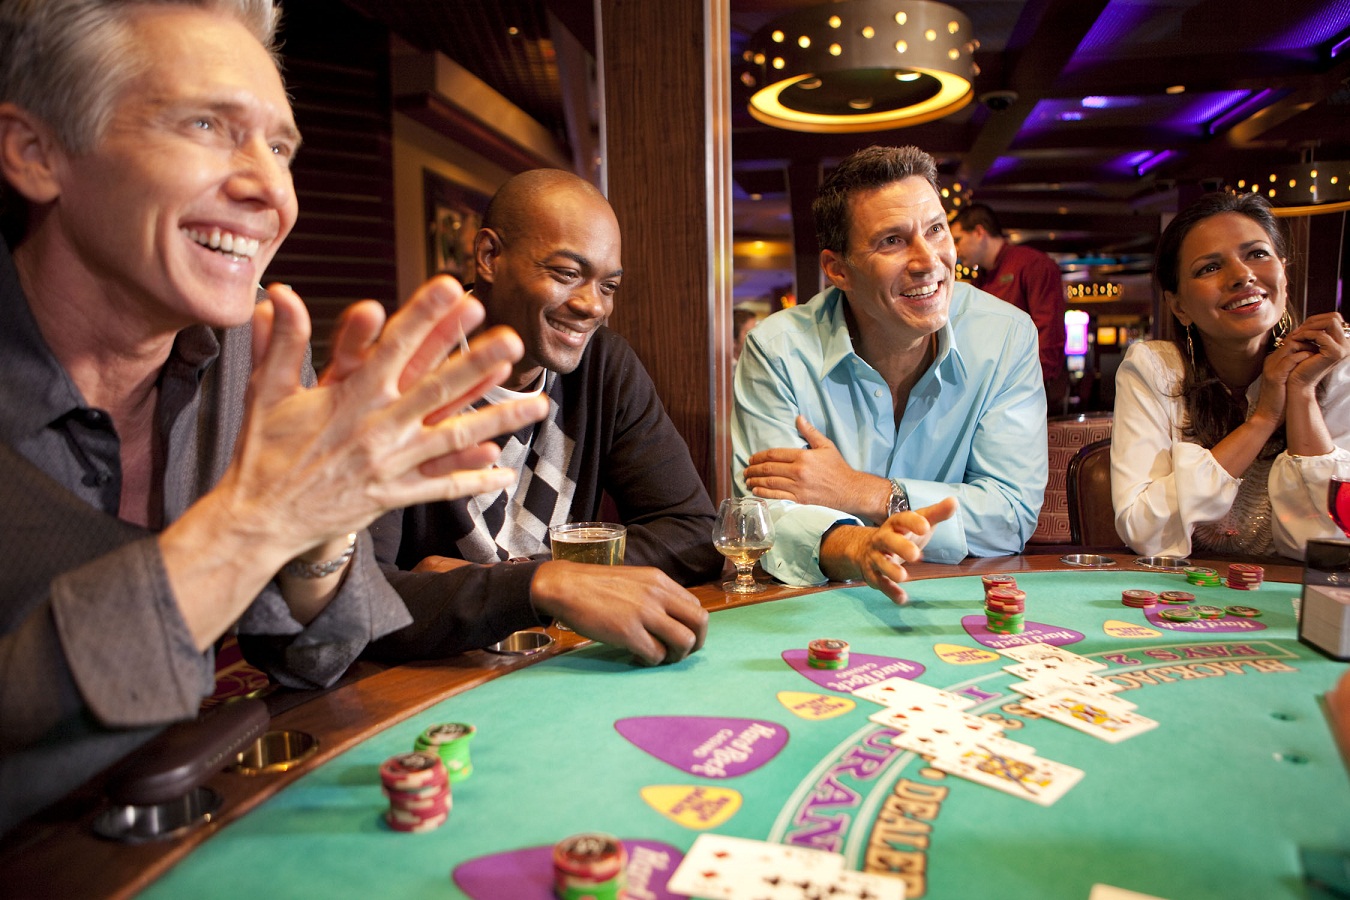 The Good Feeling Casino Experience: Where Fun and Fortune Meet